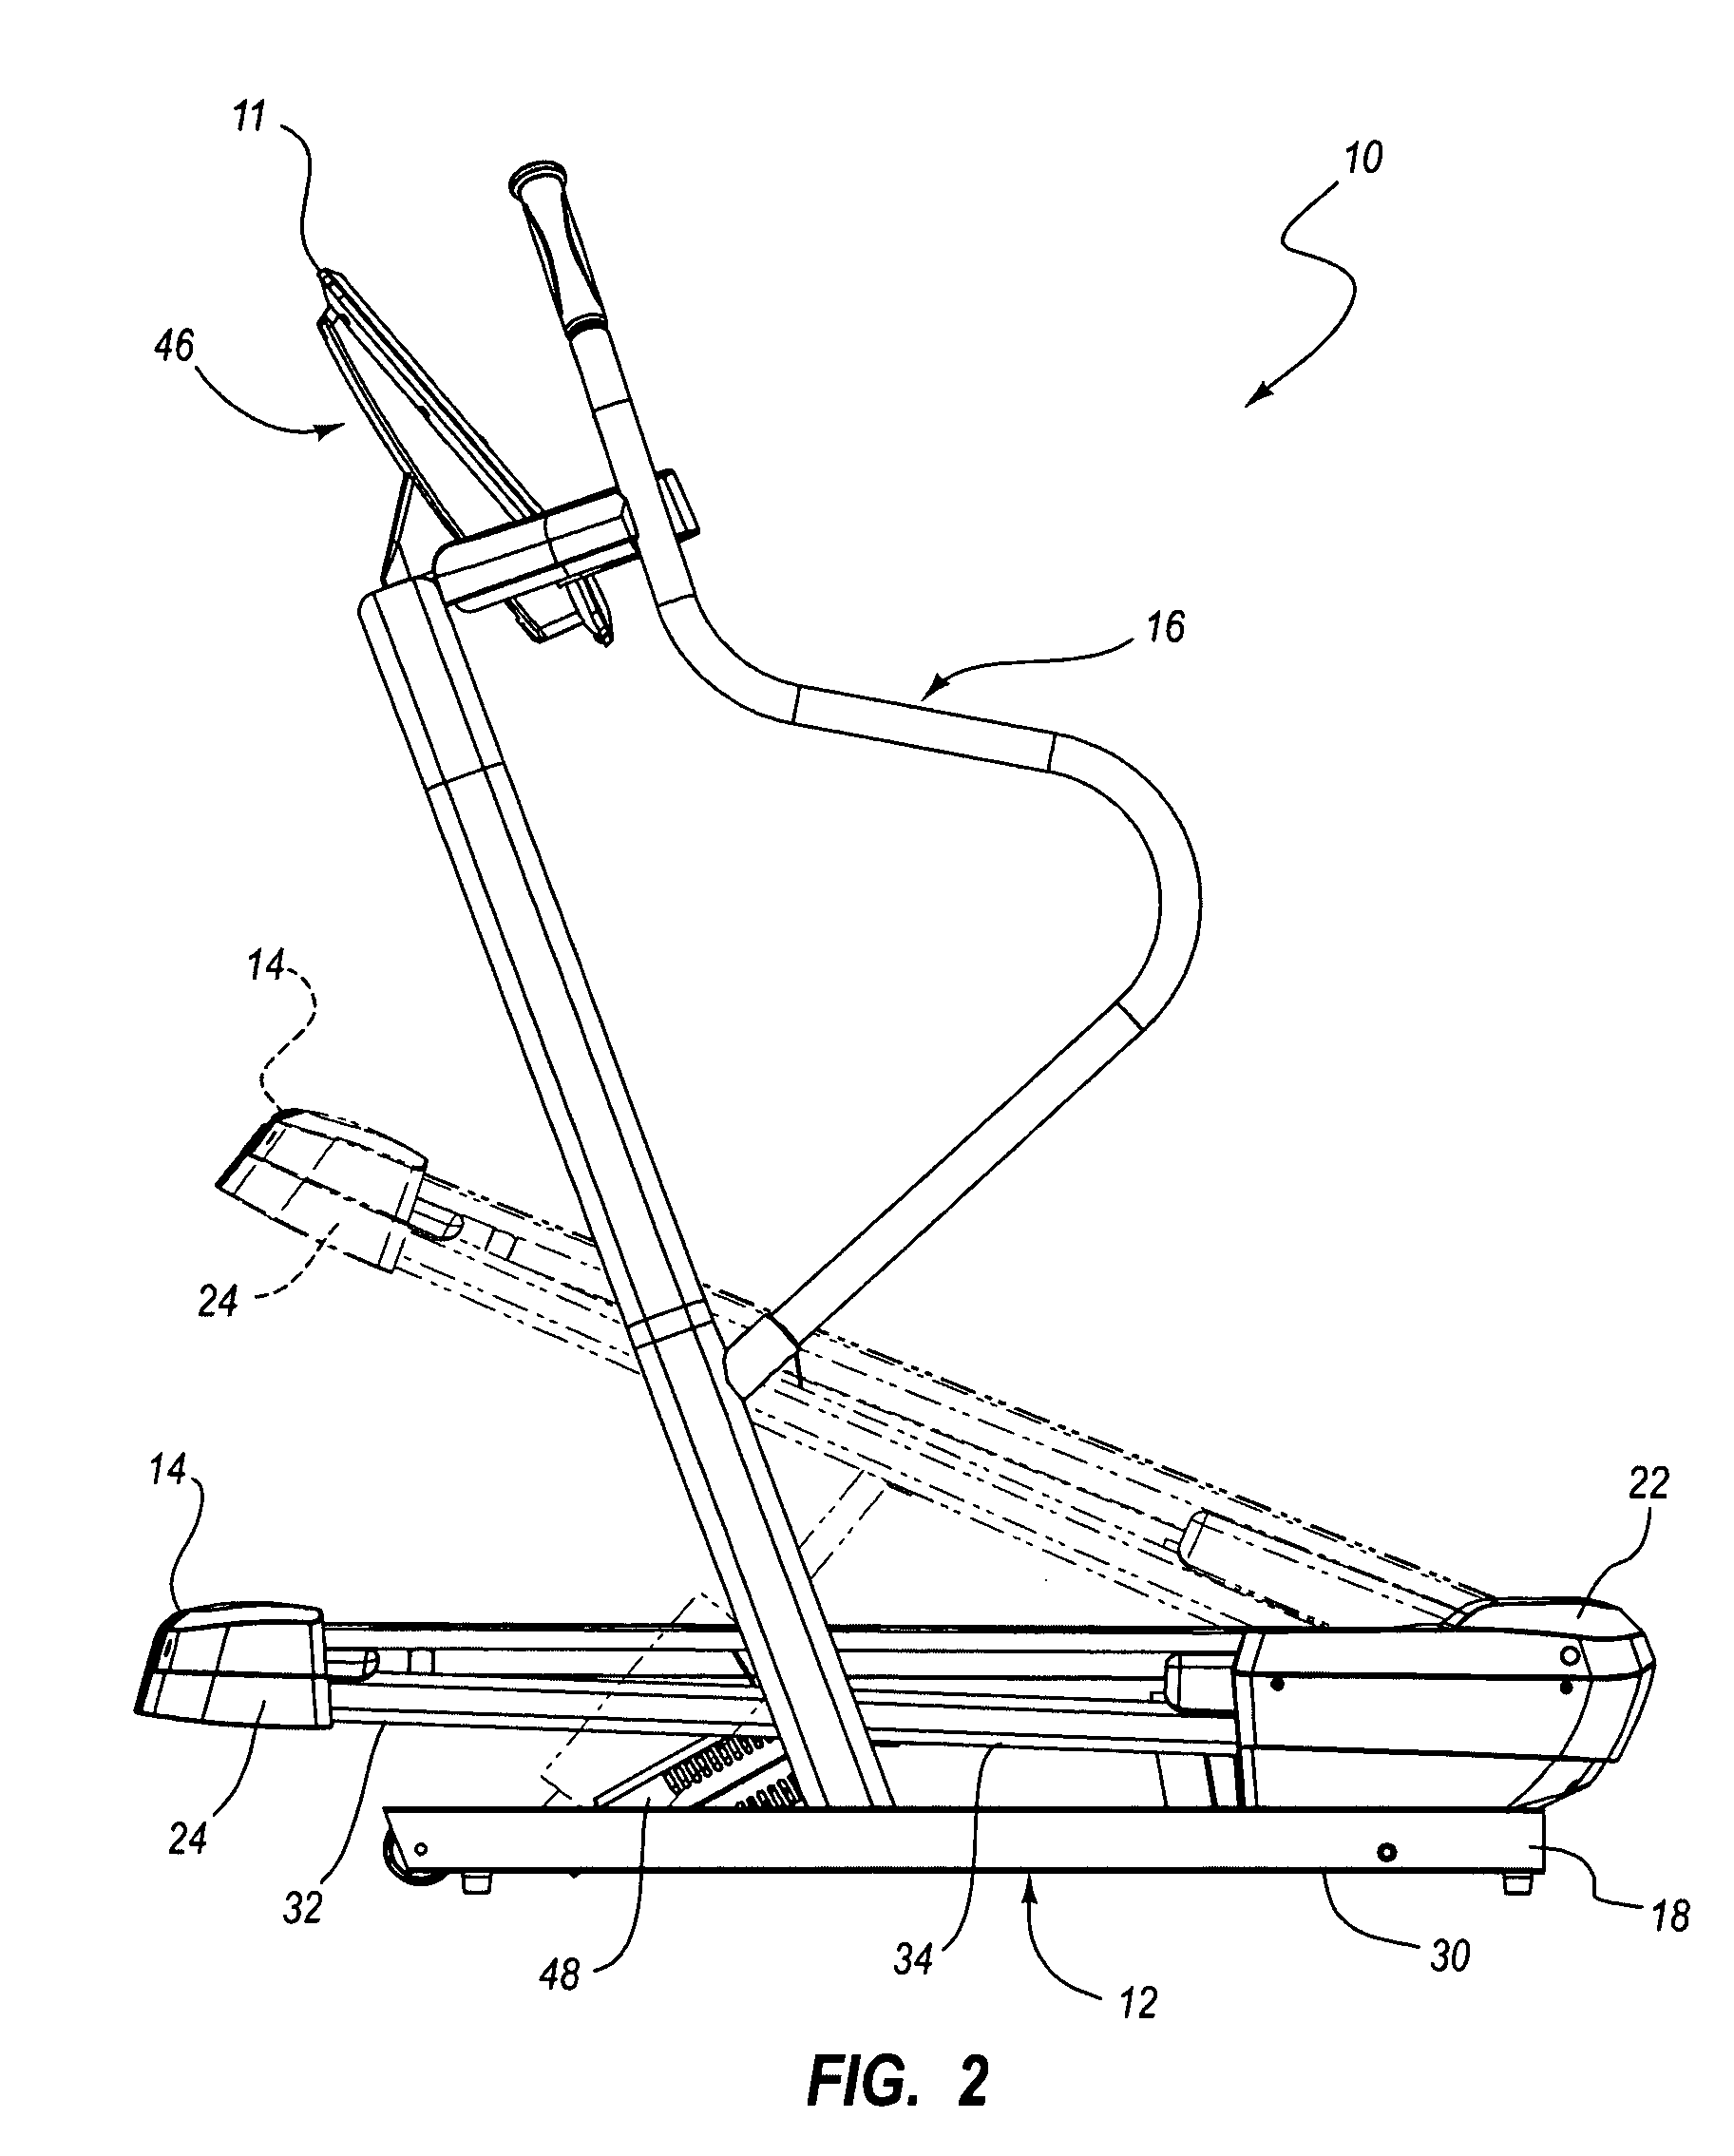 Inclining treadmill with magnetic braking system